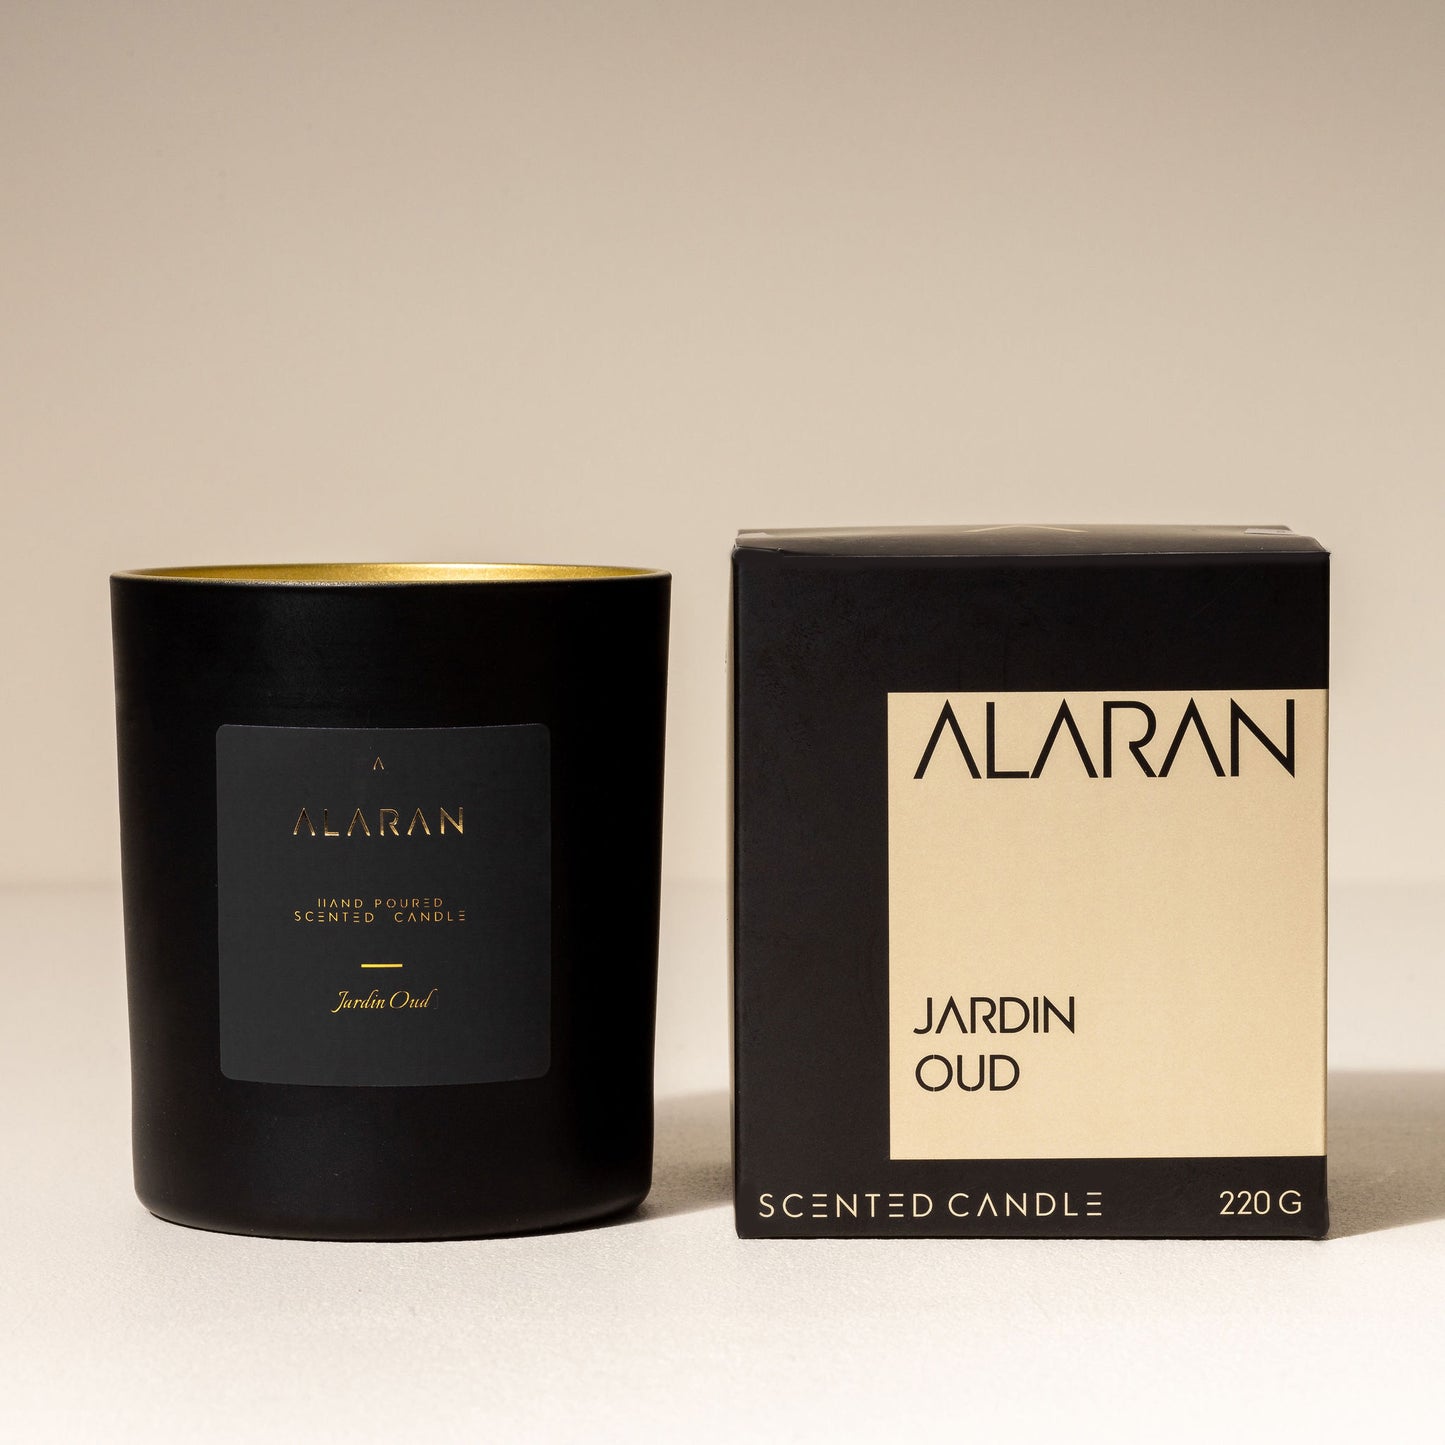 Jardin Oud Candle with packaging on a neutral background